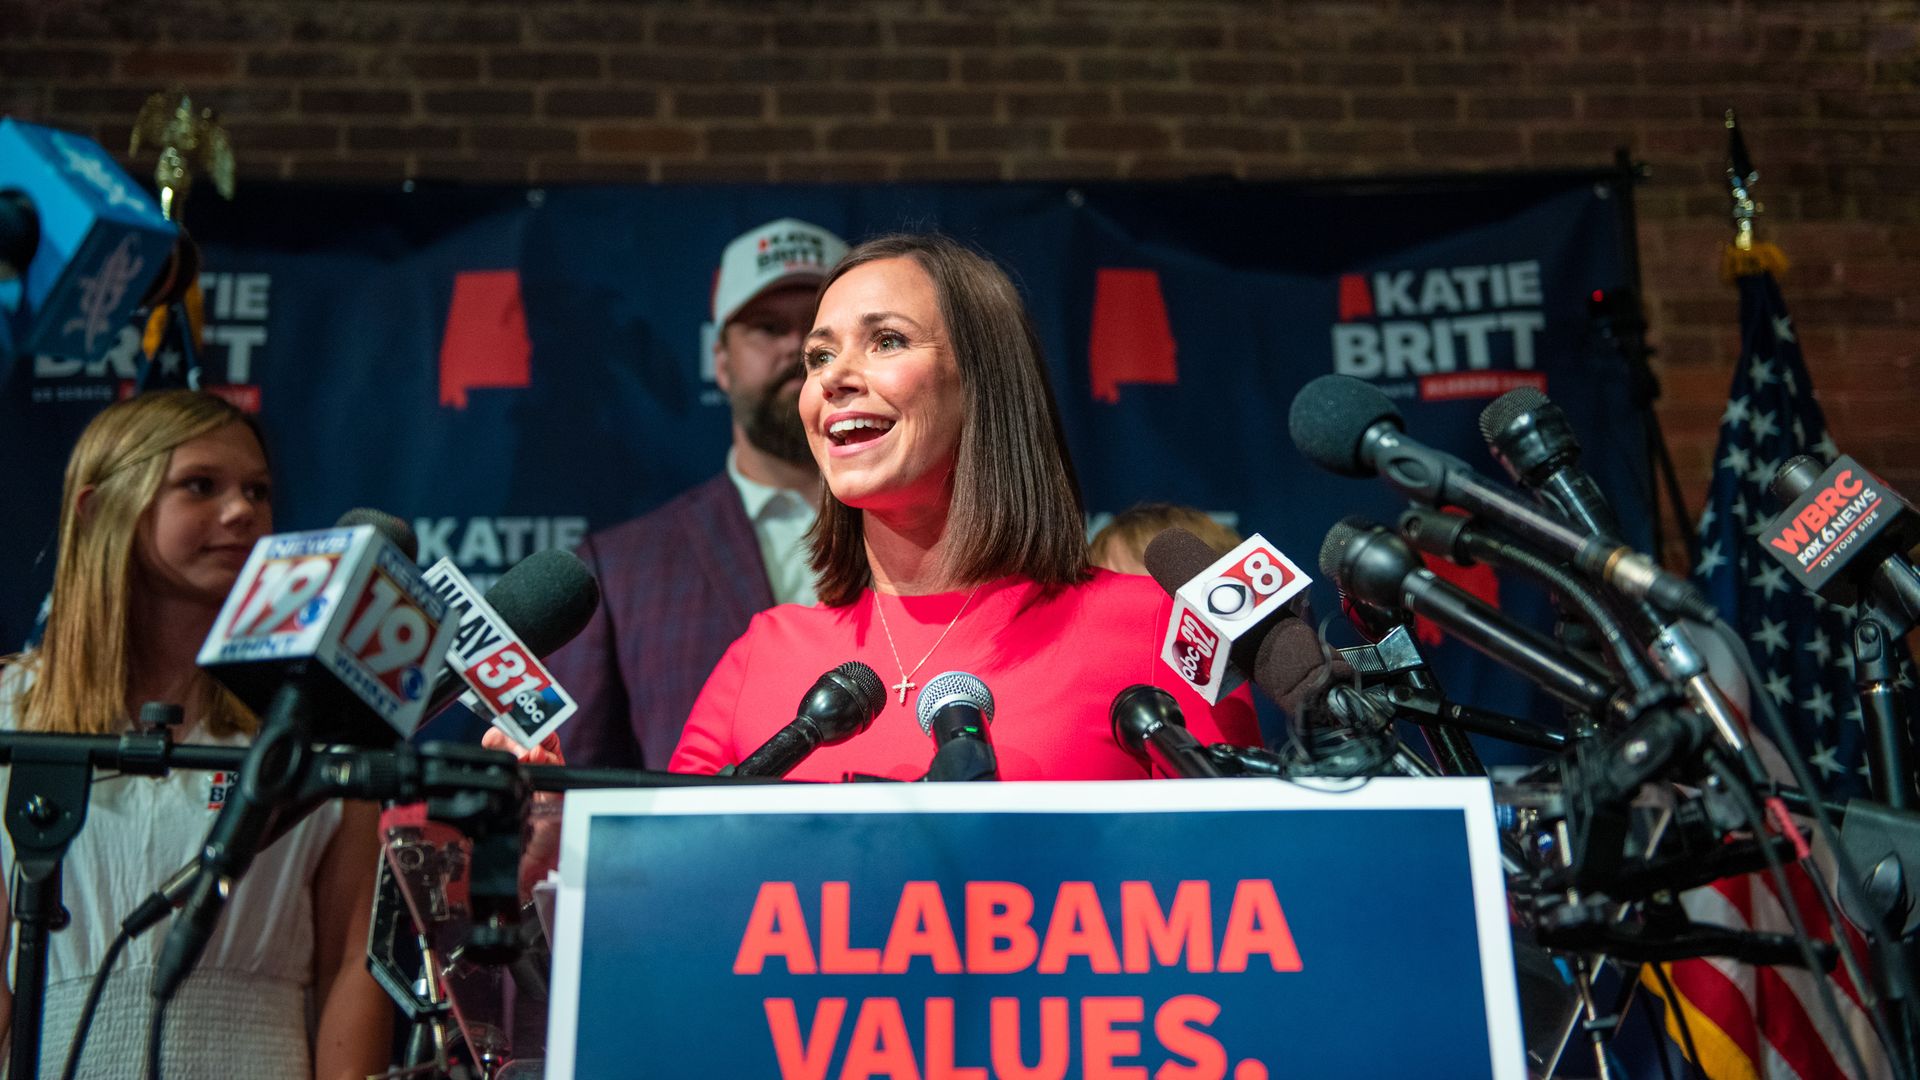 Photo of Katie Britt speaking from a podium at a rally